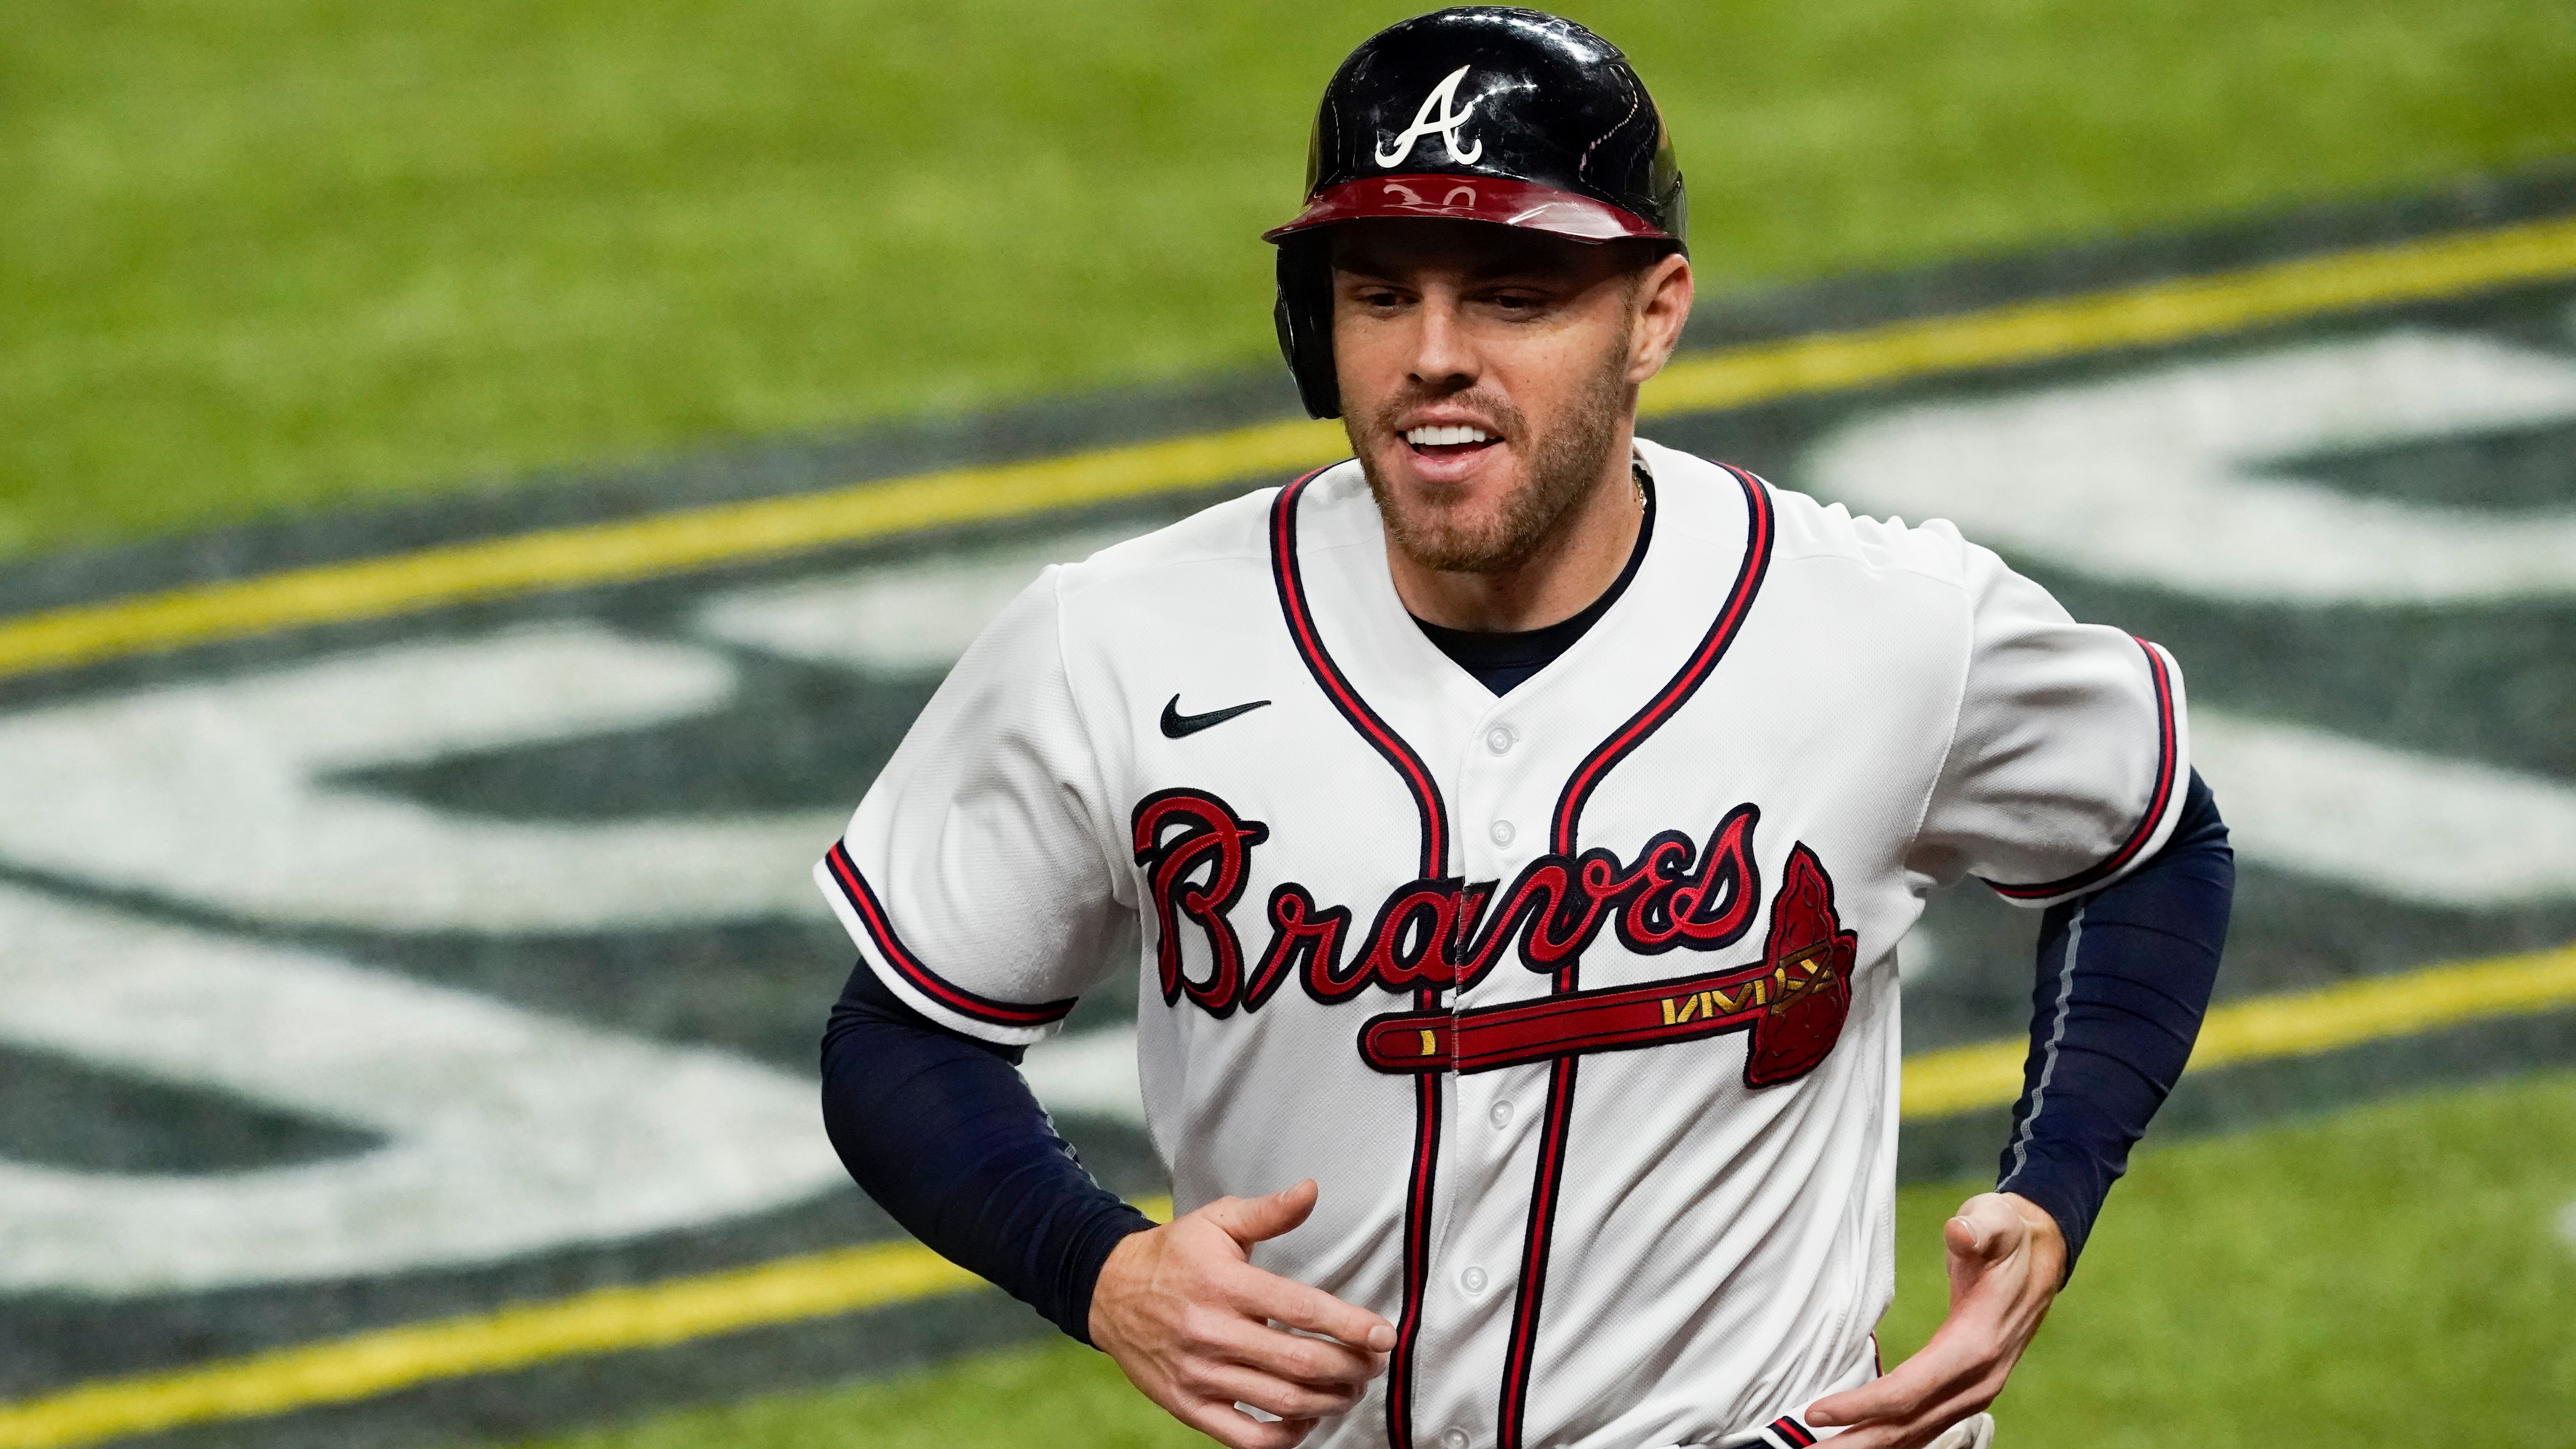 Braves players call to re-sign Freddie Freeman at World Series